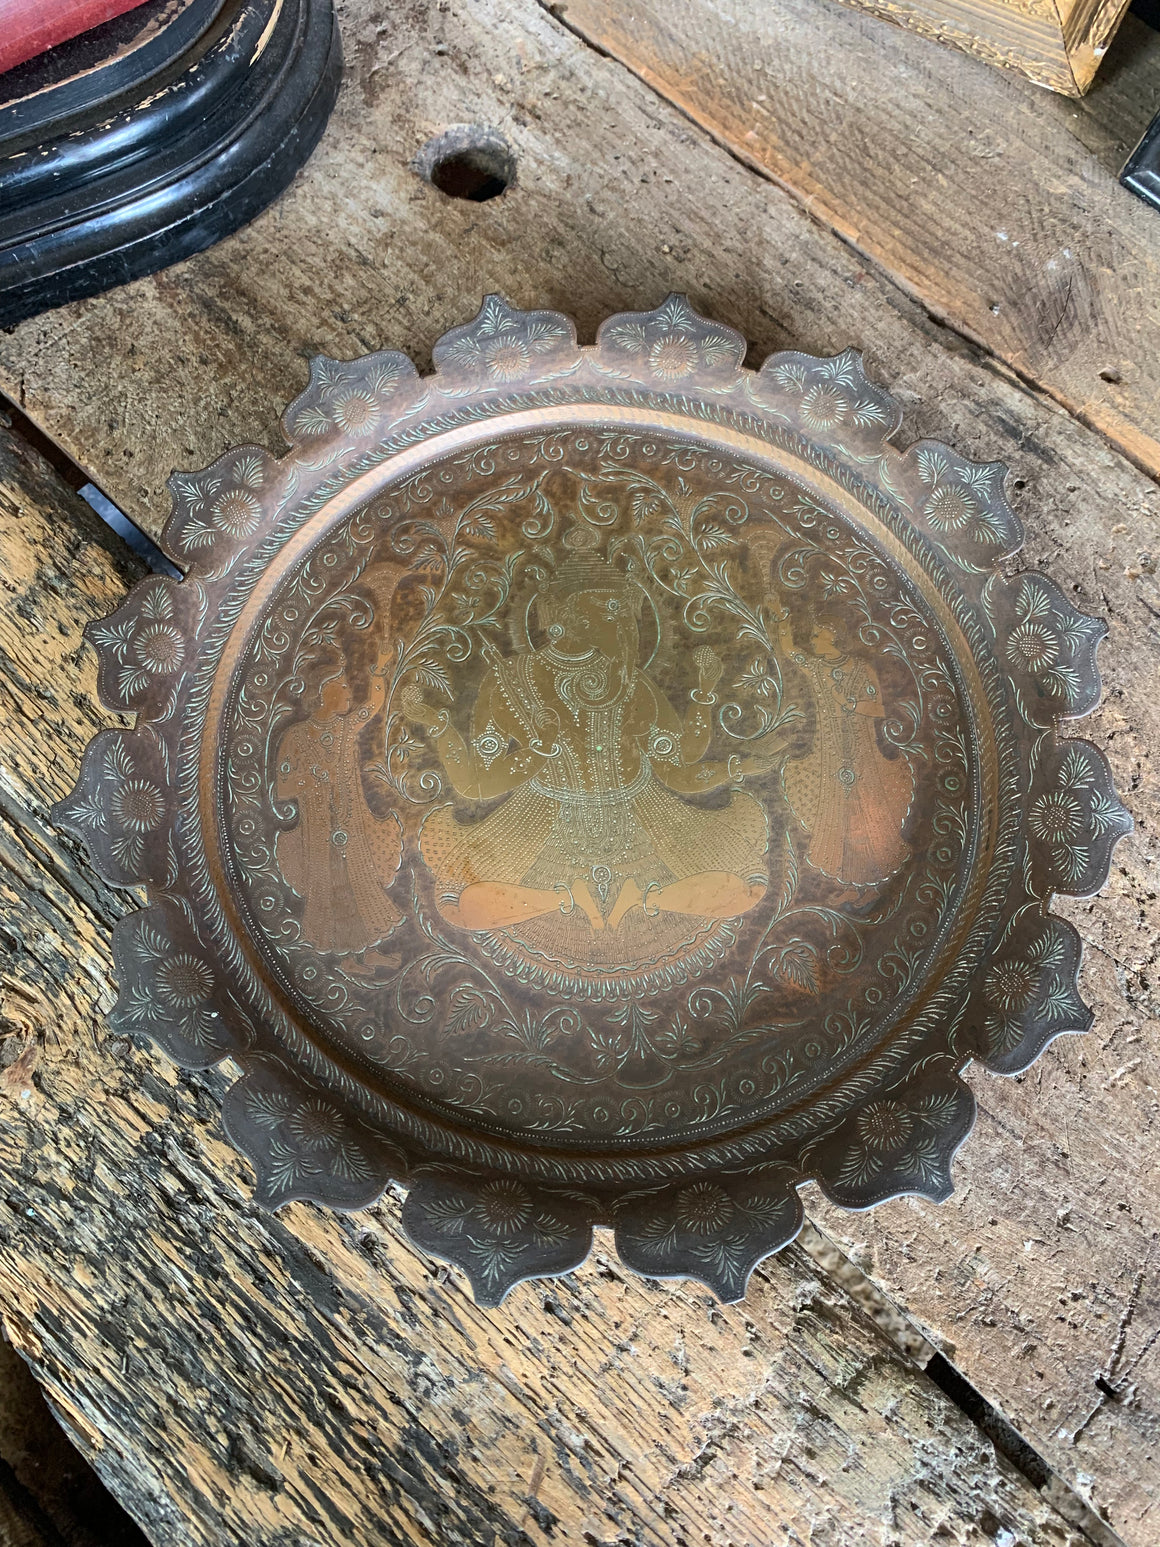 An Indian bronze dish adorned with Ganesha